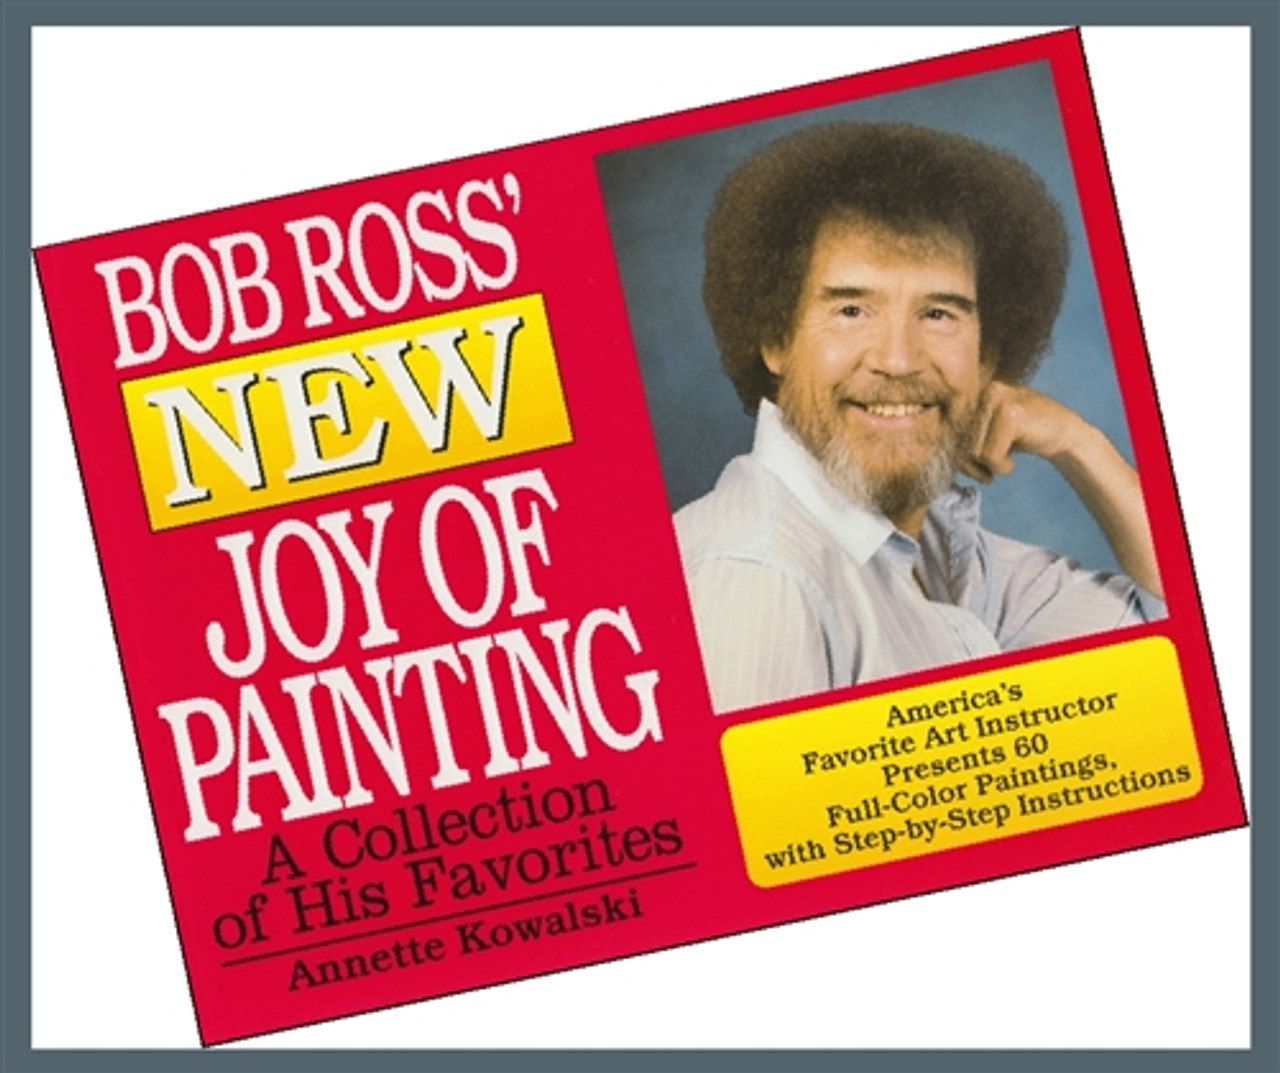 Painting Supplies - Accessories - Kits - Page 1 - Bob Ross Inc.